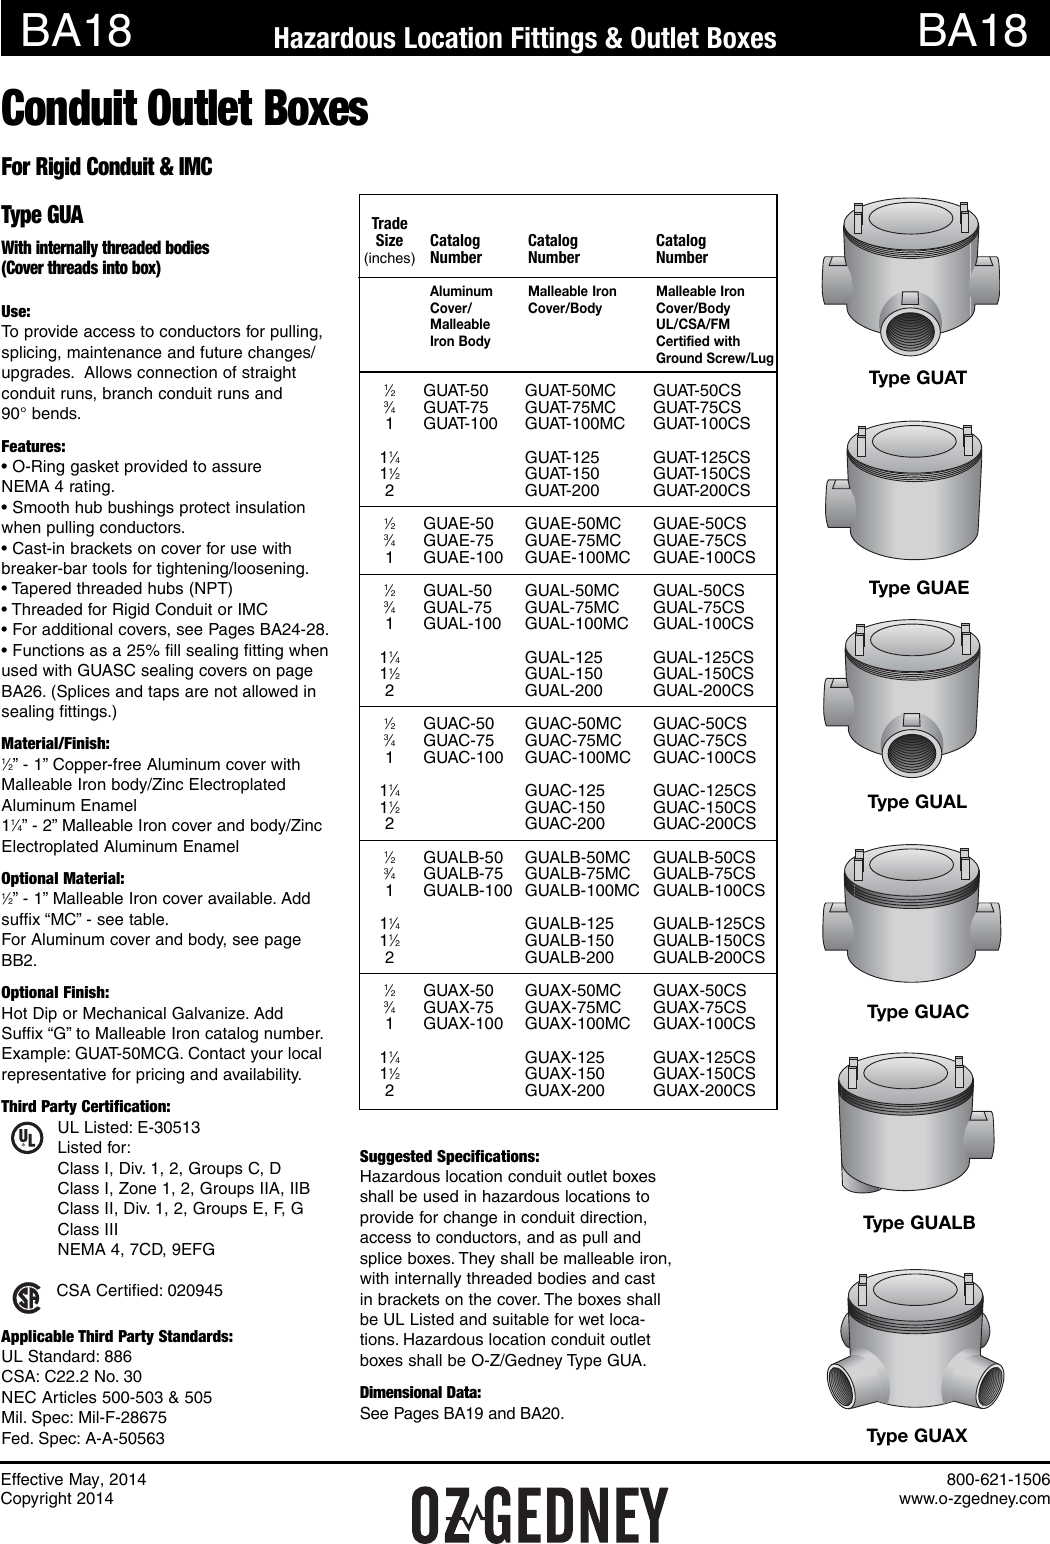 Page 1 of 7 - Type GUA Conduit Outlet Boxes Catalog Pages May 2014